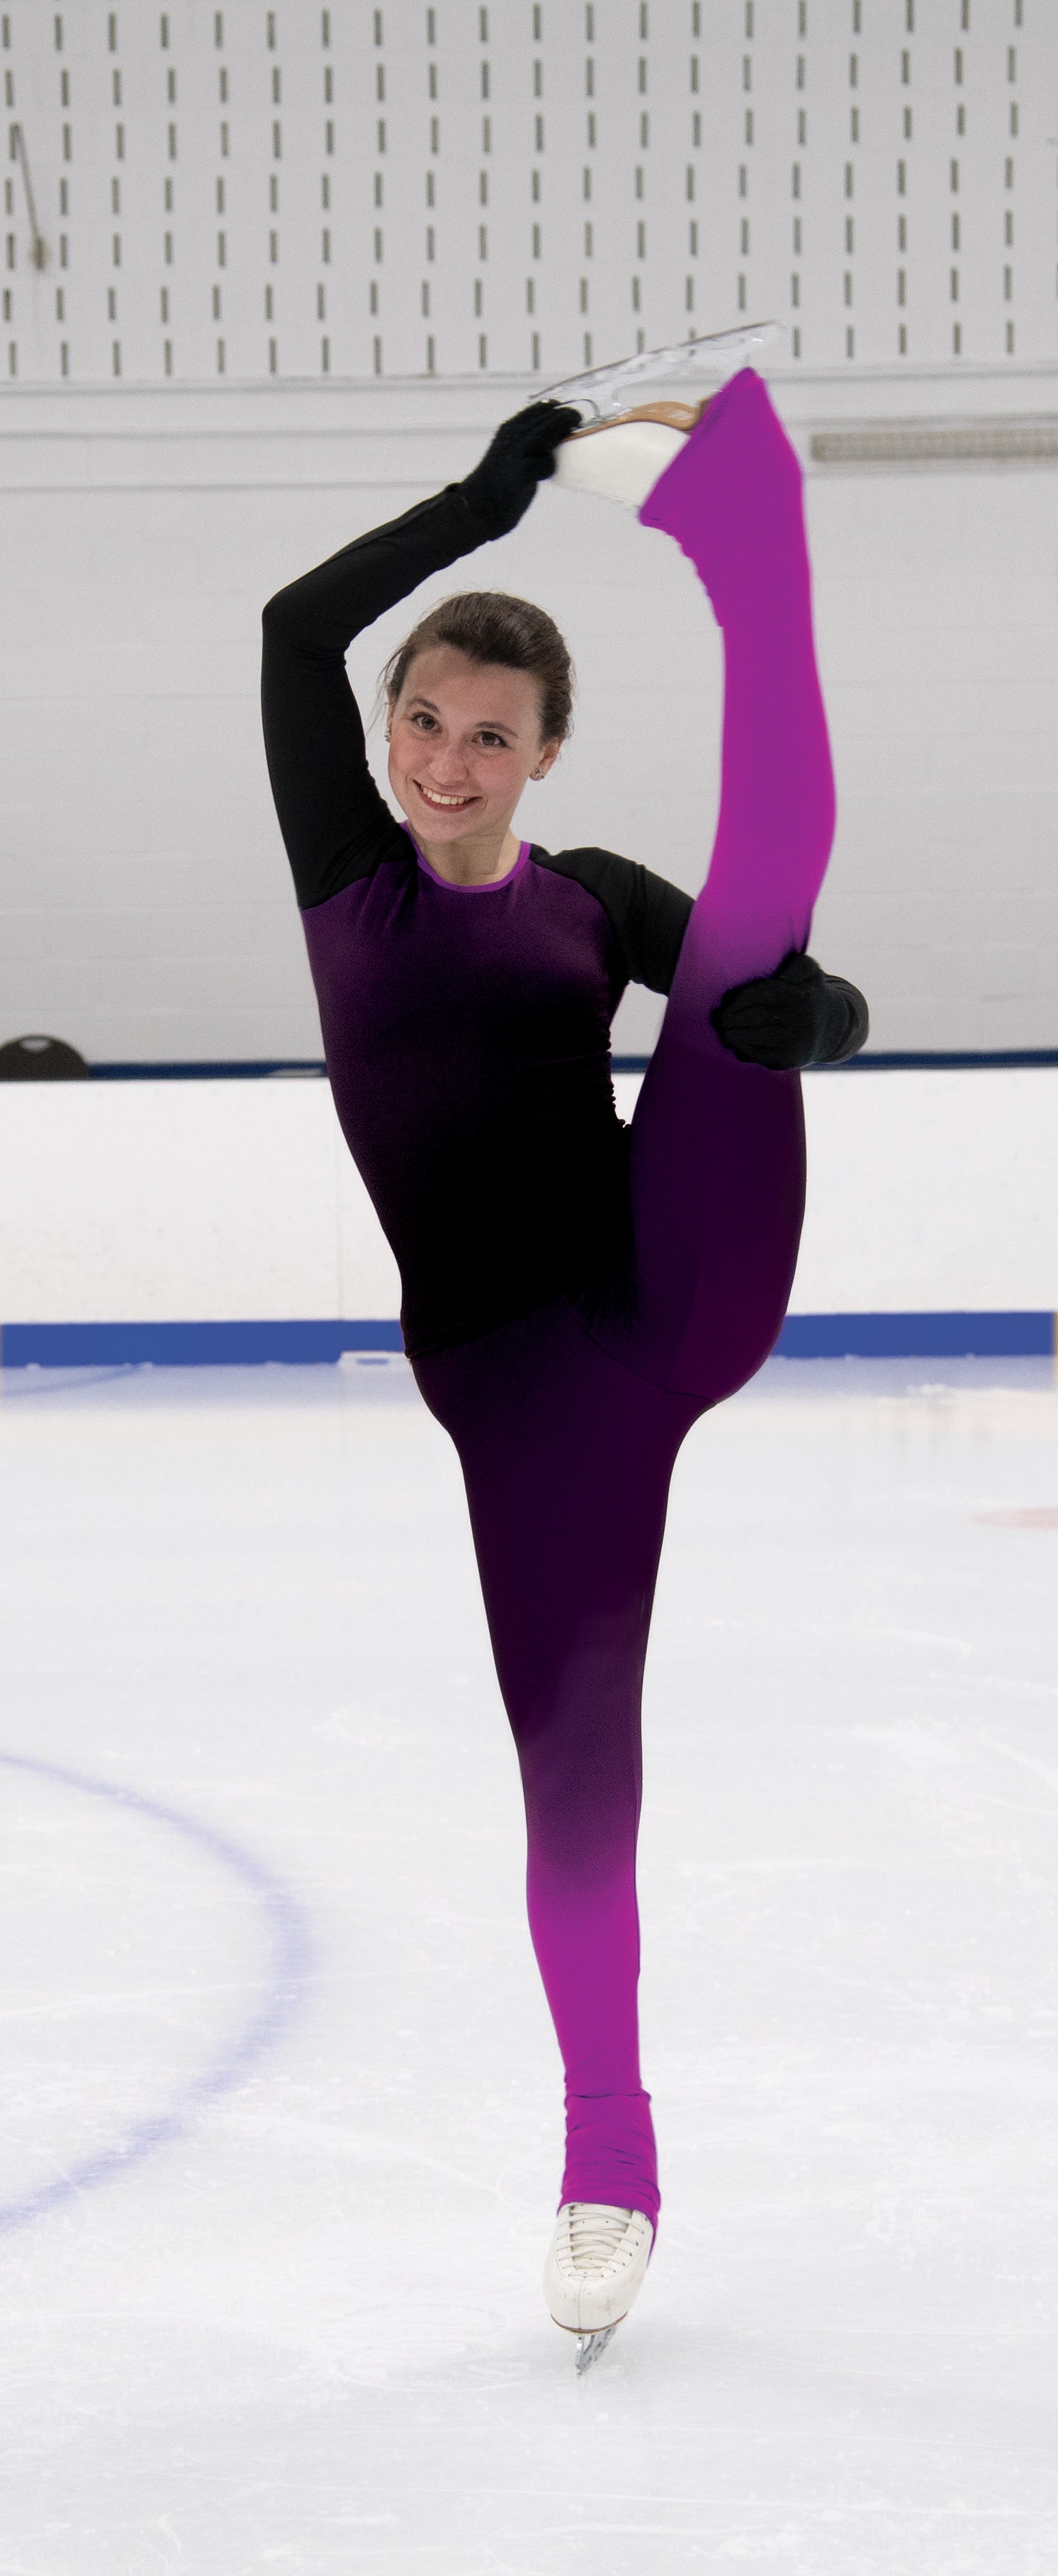 S111 Made In The Shade Skating Leggings in Orchid Shade by Jerry's